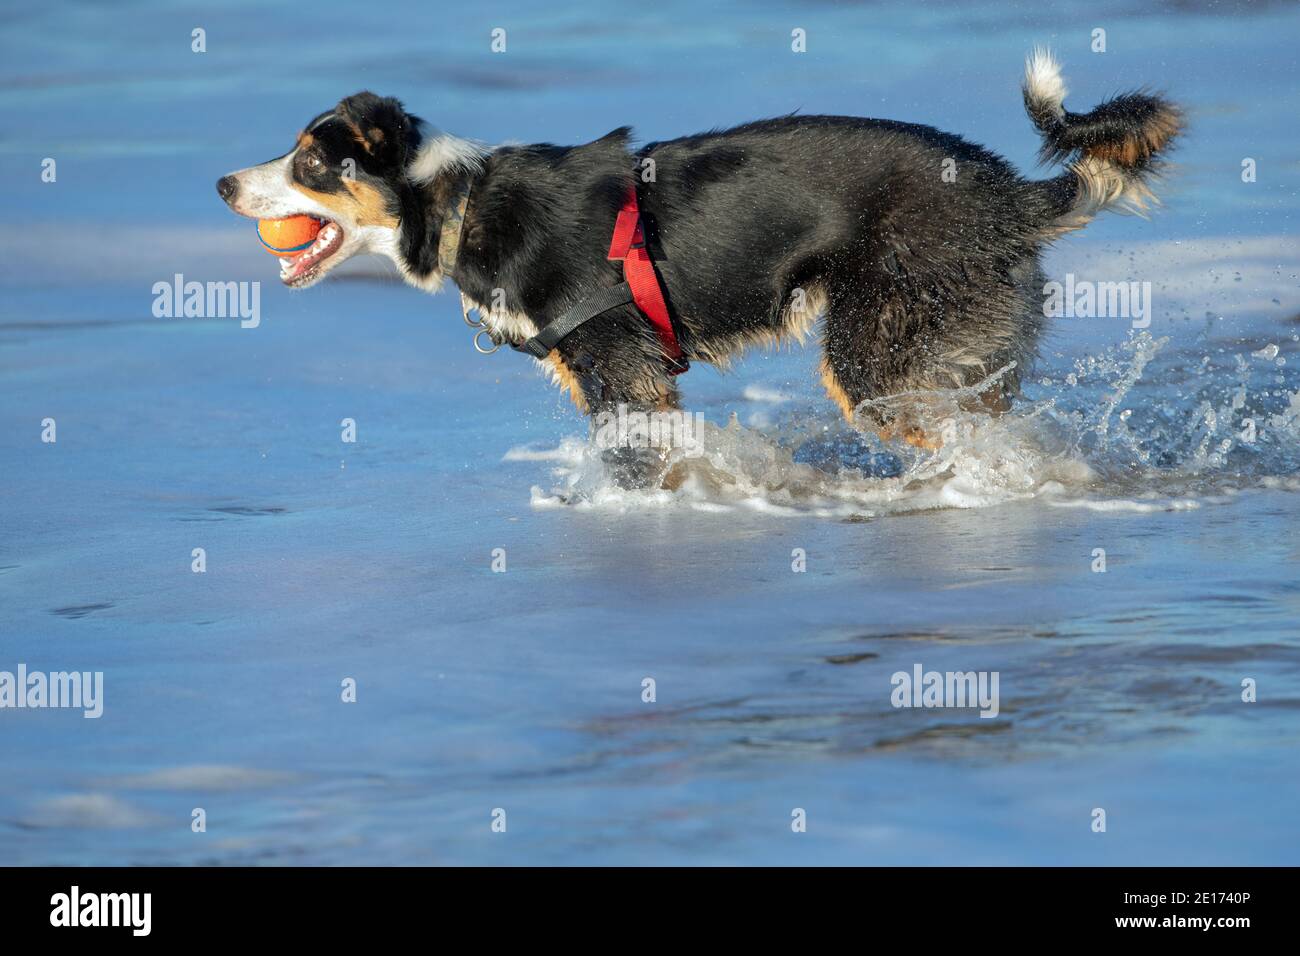 Tri-coloured Border Collie Dog (Canis familiaris). Profile, side view, wading, splashing in sea water, fetching, carrying ball in mouth. Sea side. Stock Photo